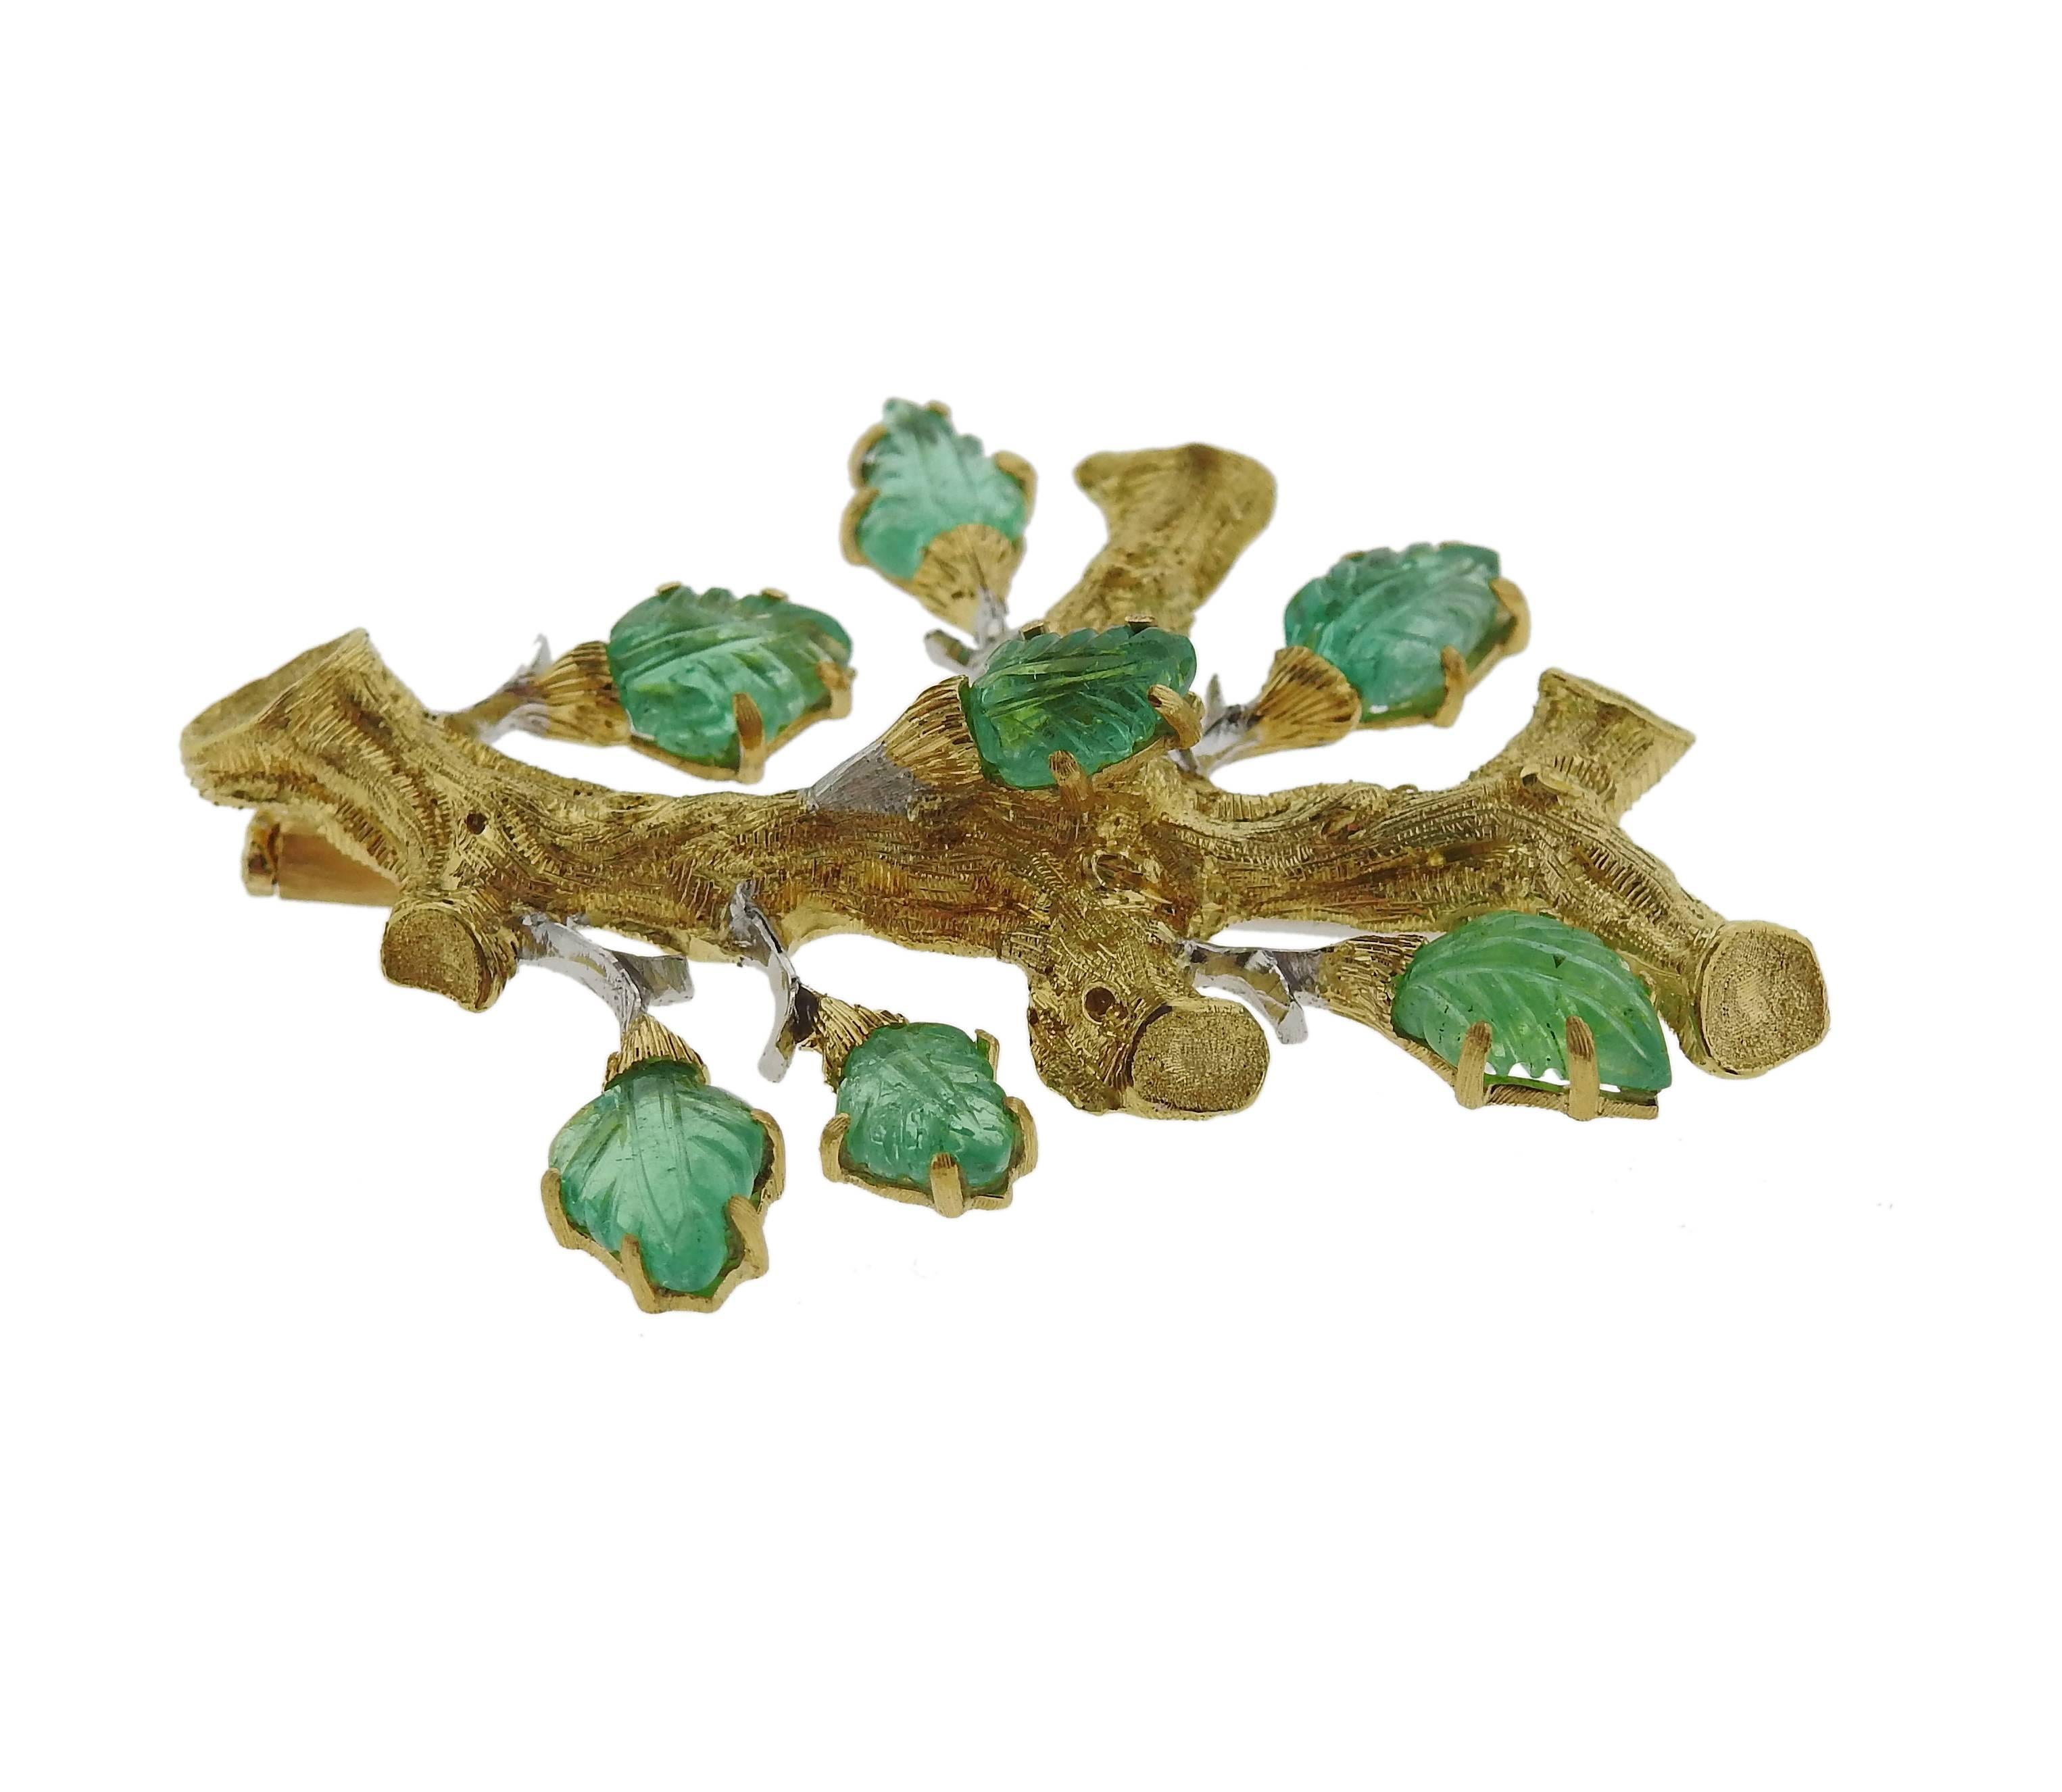 18k yellow gold brooch, crafted by Buccellati, featuring carved emeralds. Brooch is 50mm x 32mm and weighs 20.4 grams. Marked: Buccellati 18k Italy L3032.
Retail price $19630